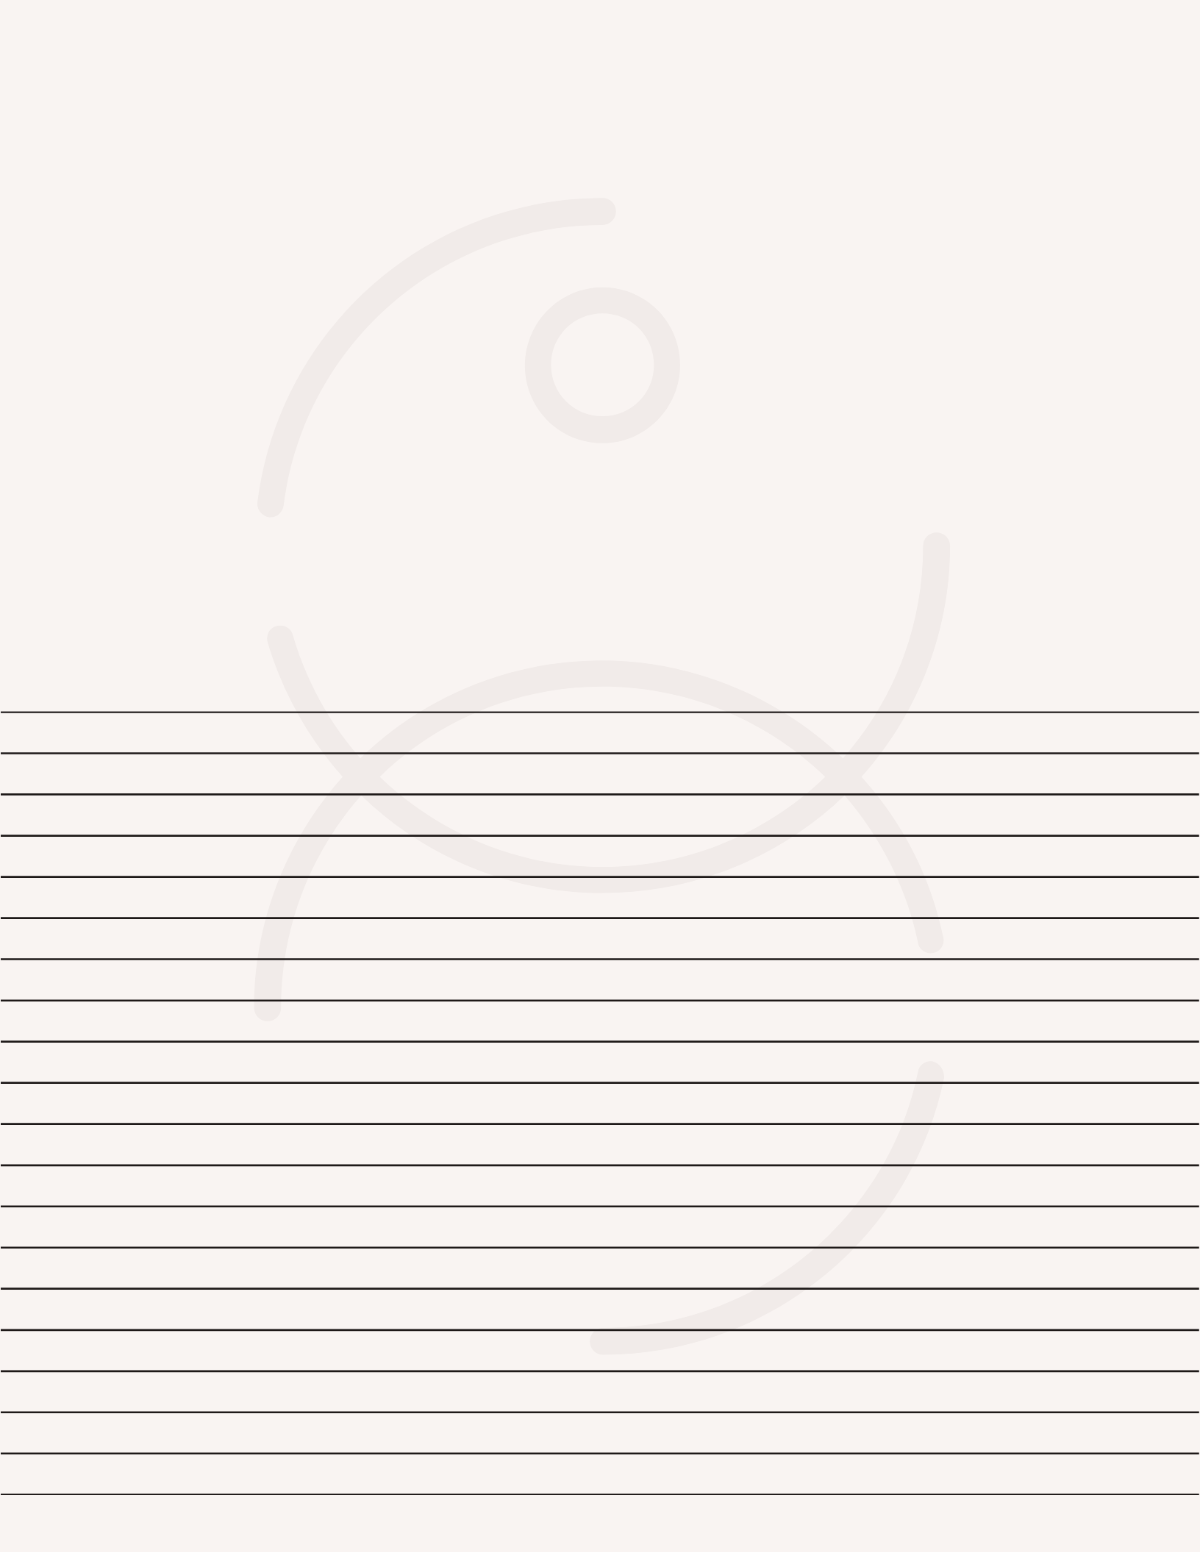 Half-Lined Notebook Paper Template